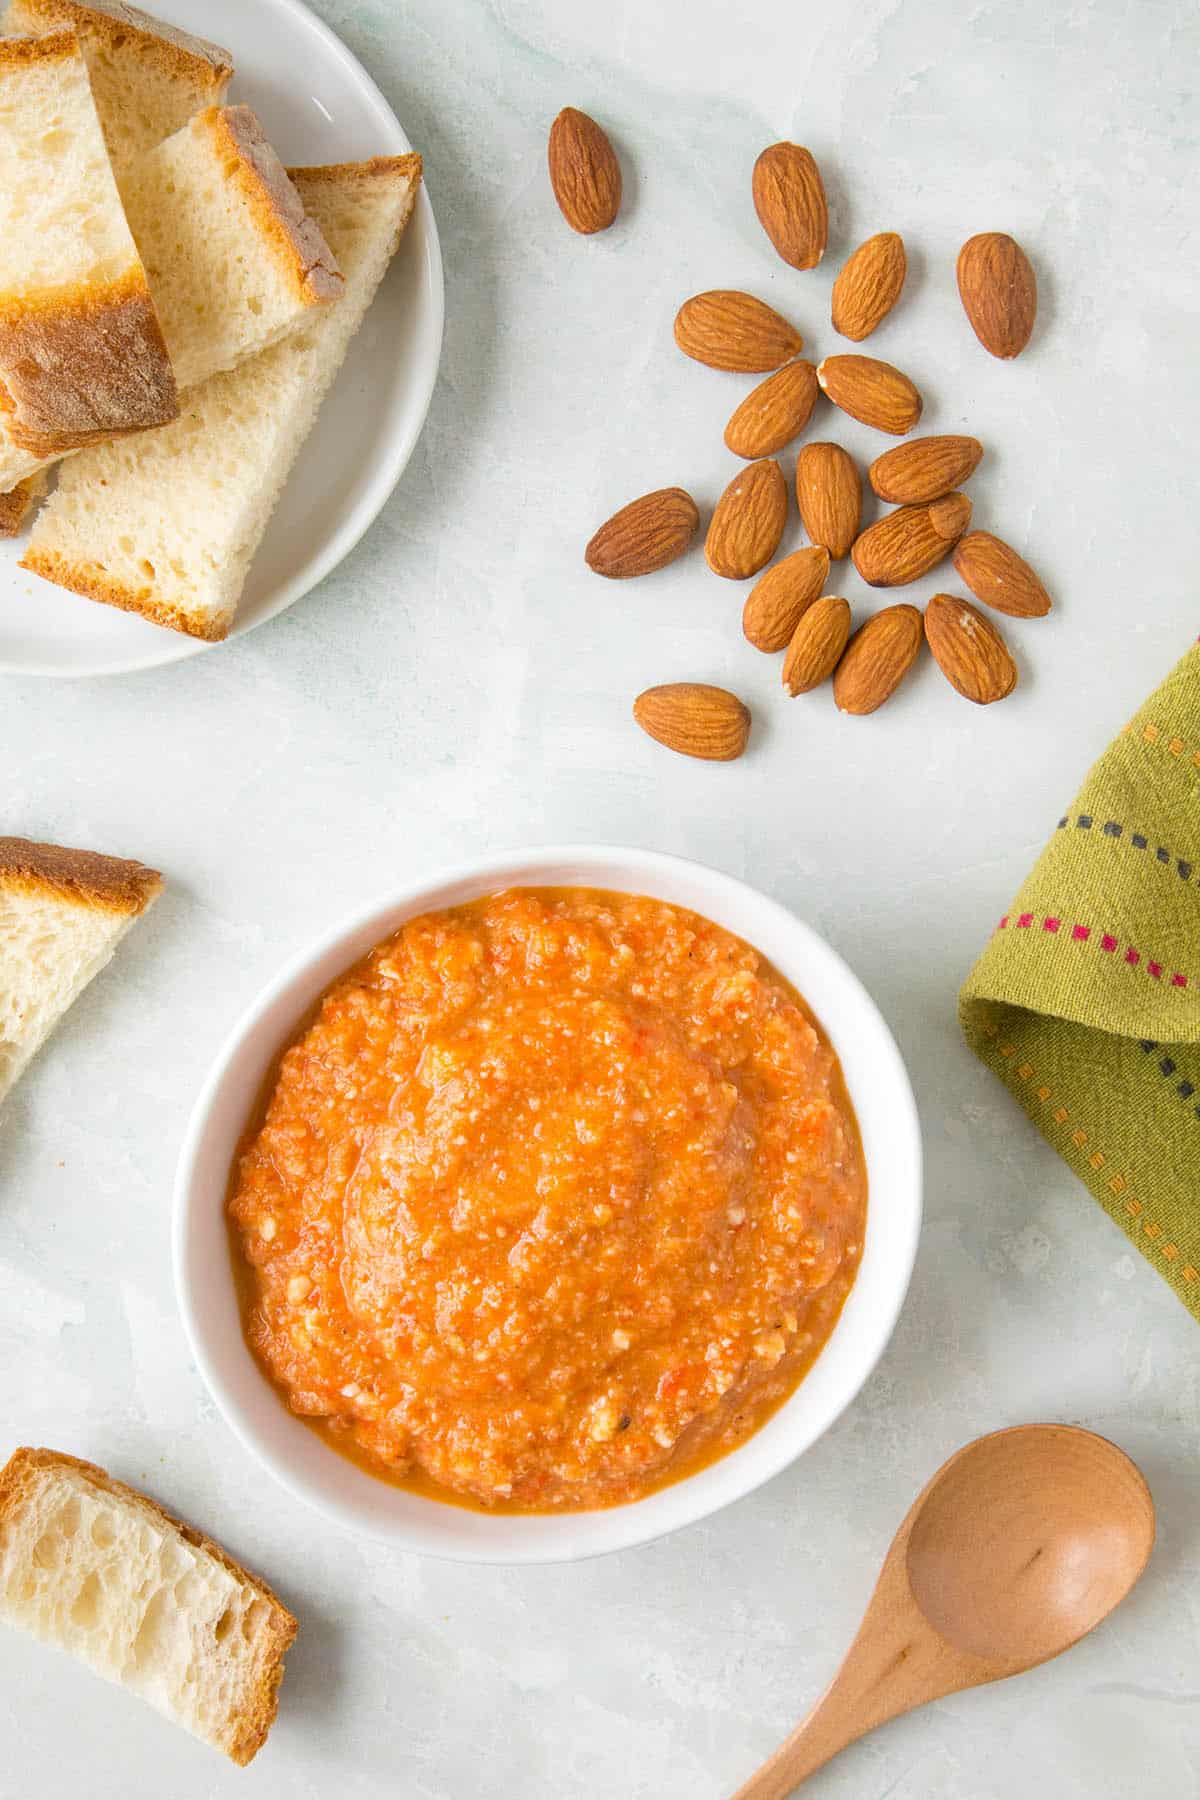 Romesco Sauce - In a bowl, ready to serve